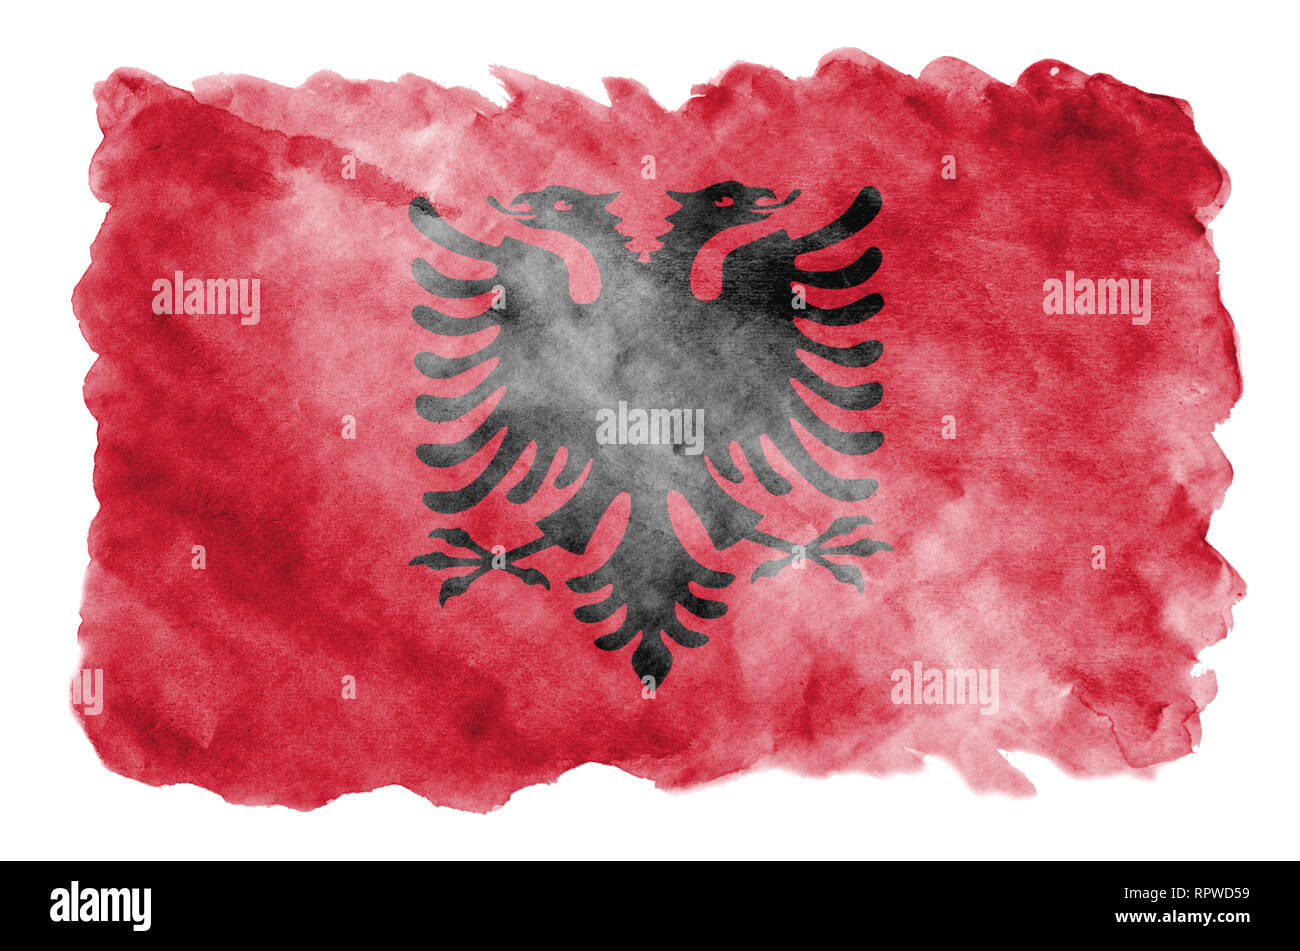 Albania flag  is depicted in liquid watercolor style isolated on white background. Careless paint shading with image of national flag. Independence Da Stock Photo